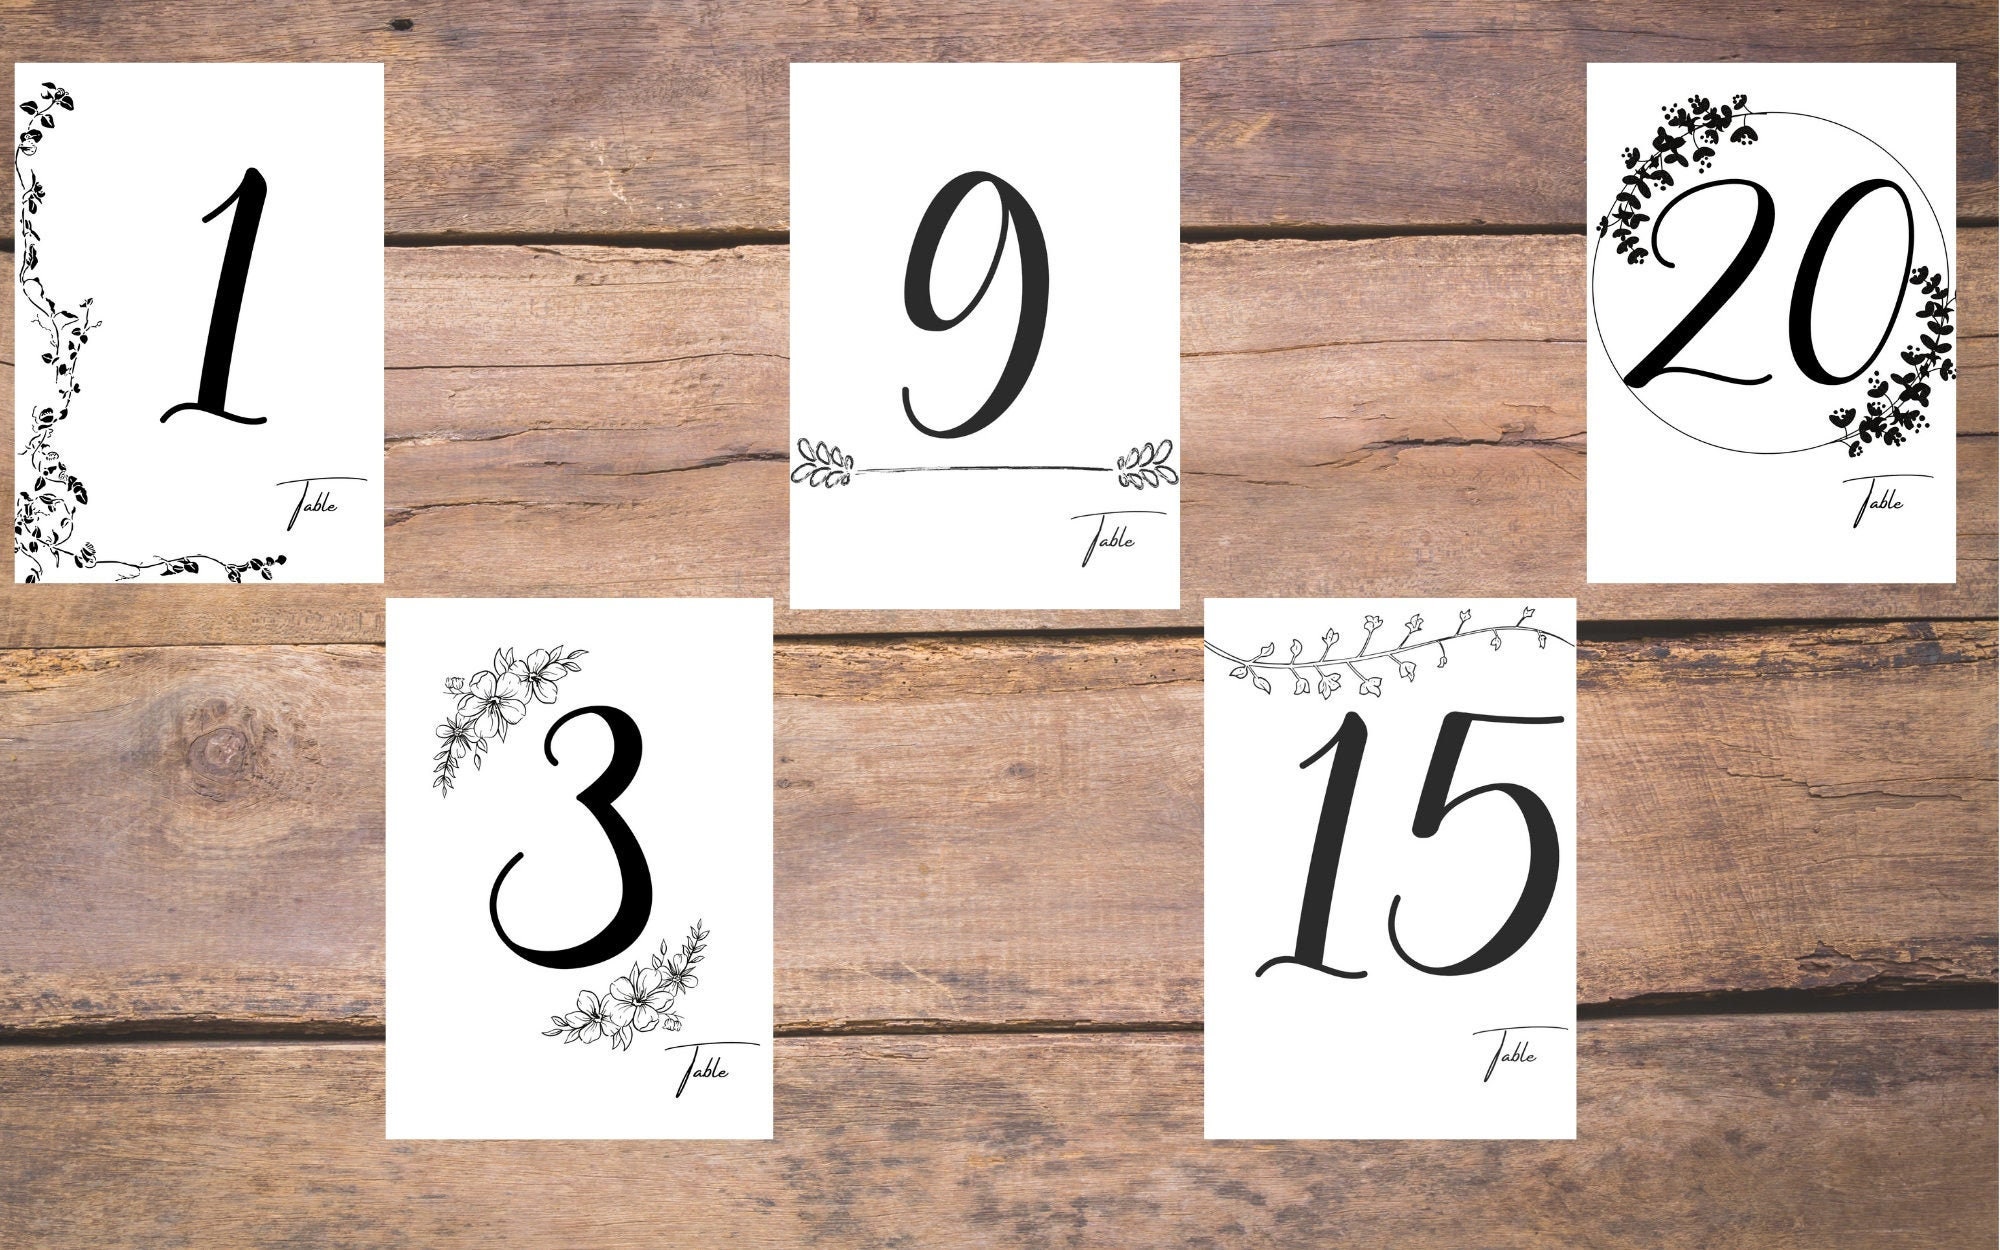 8-best-images-of-printable-wedding-table-number-templates-wedding-28